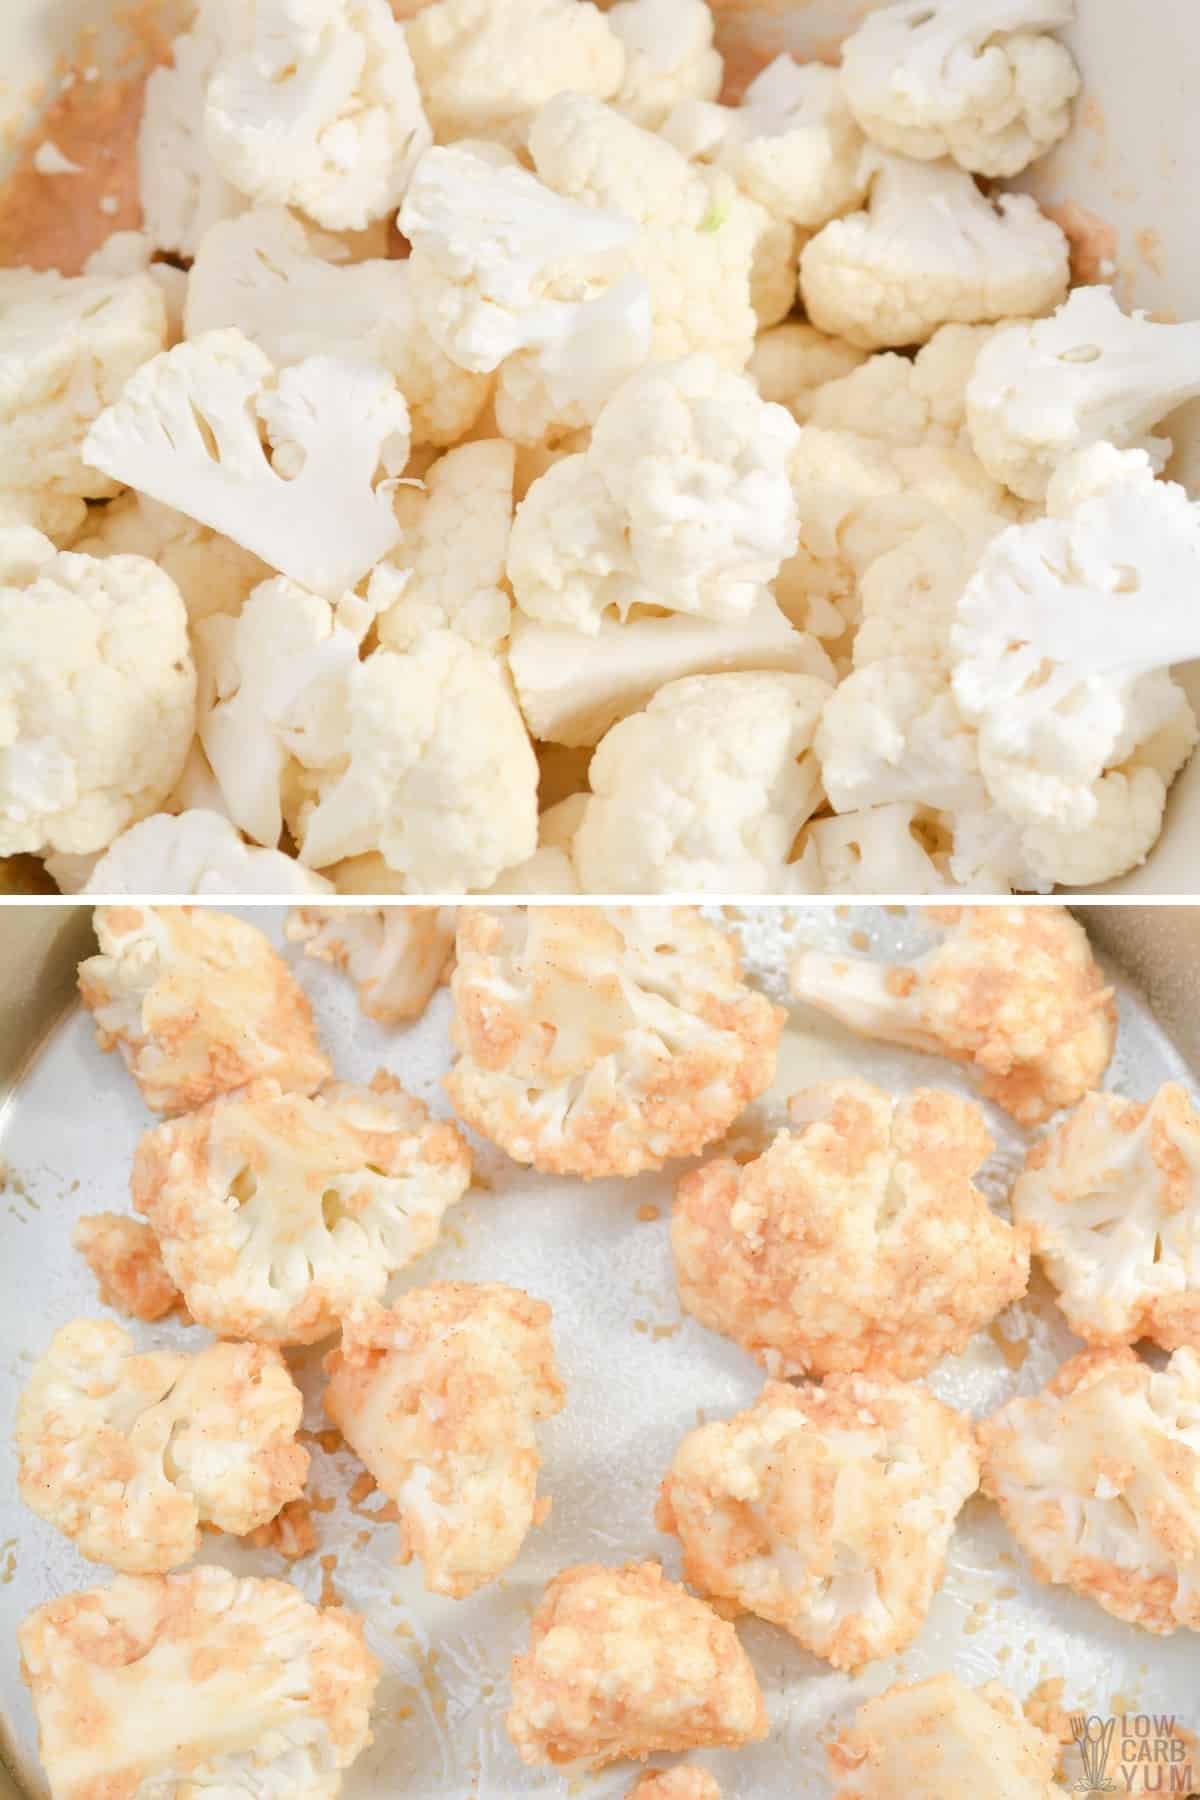 coating the cauliflower florets with batter